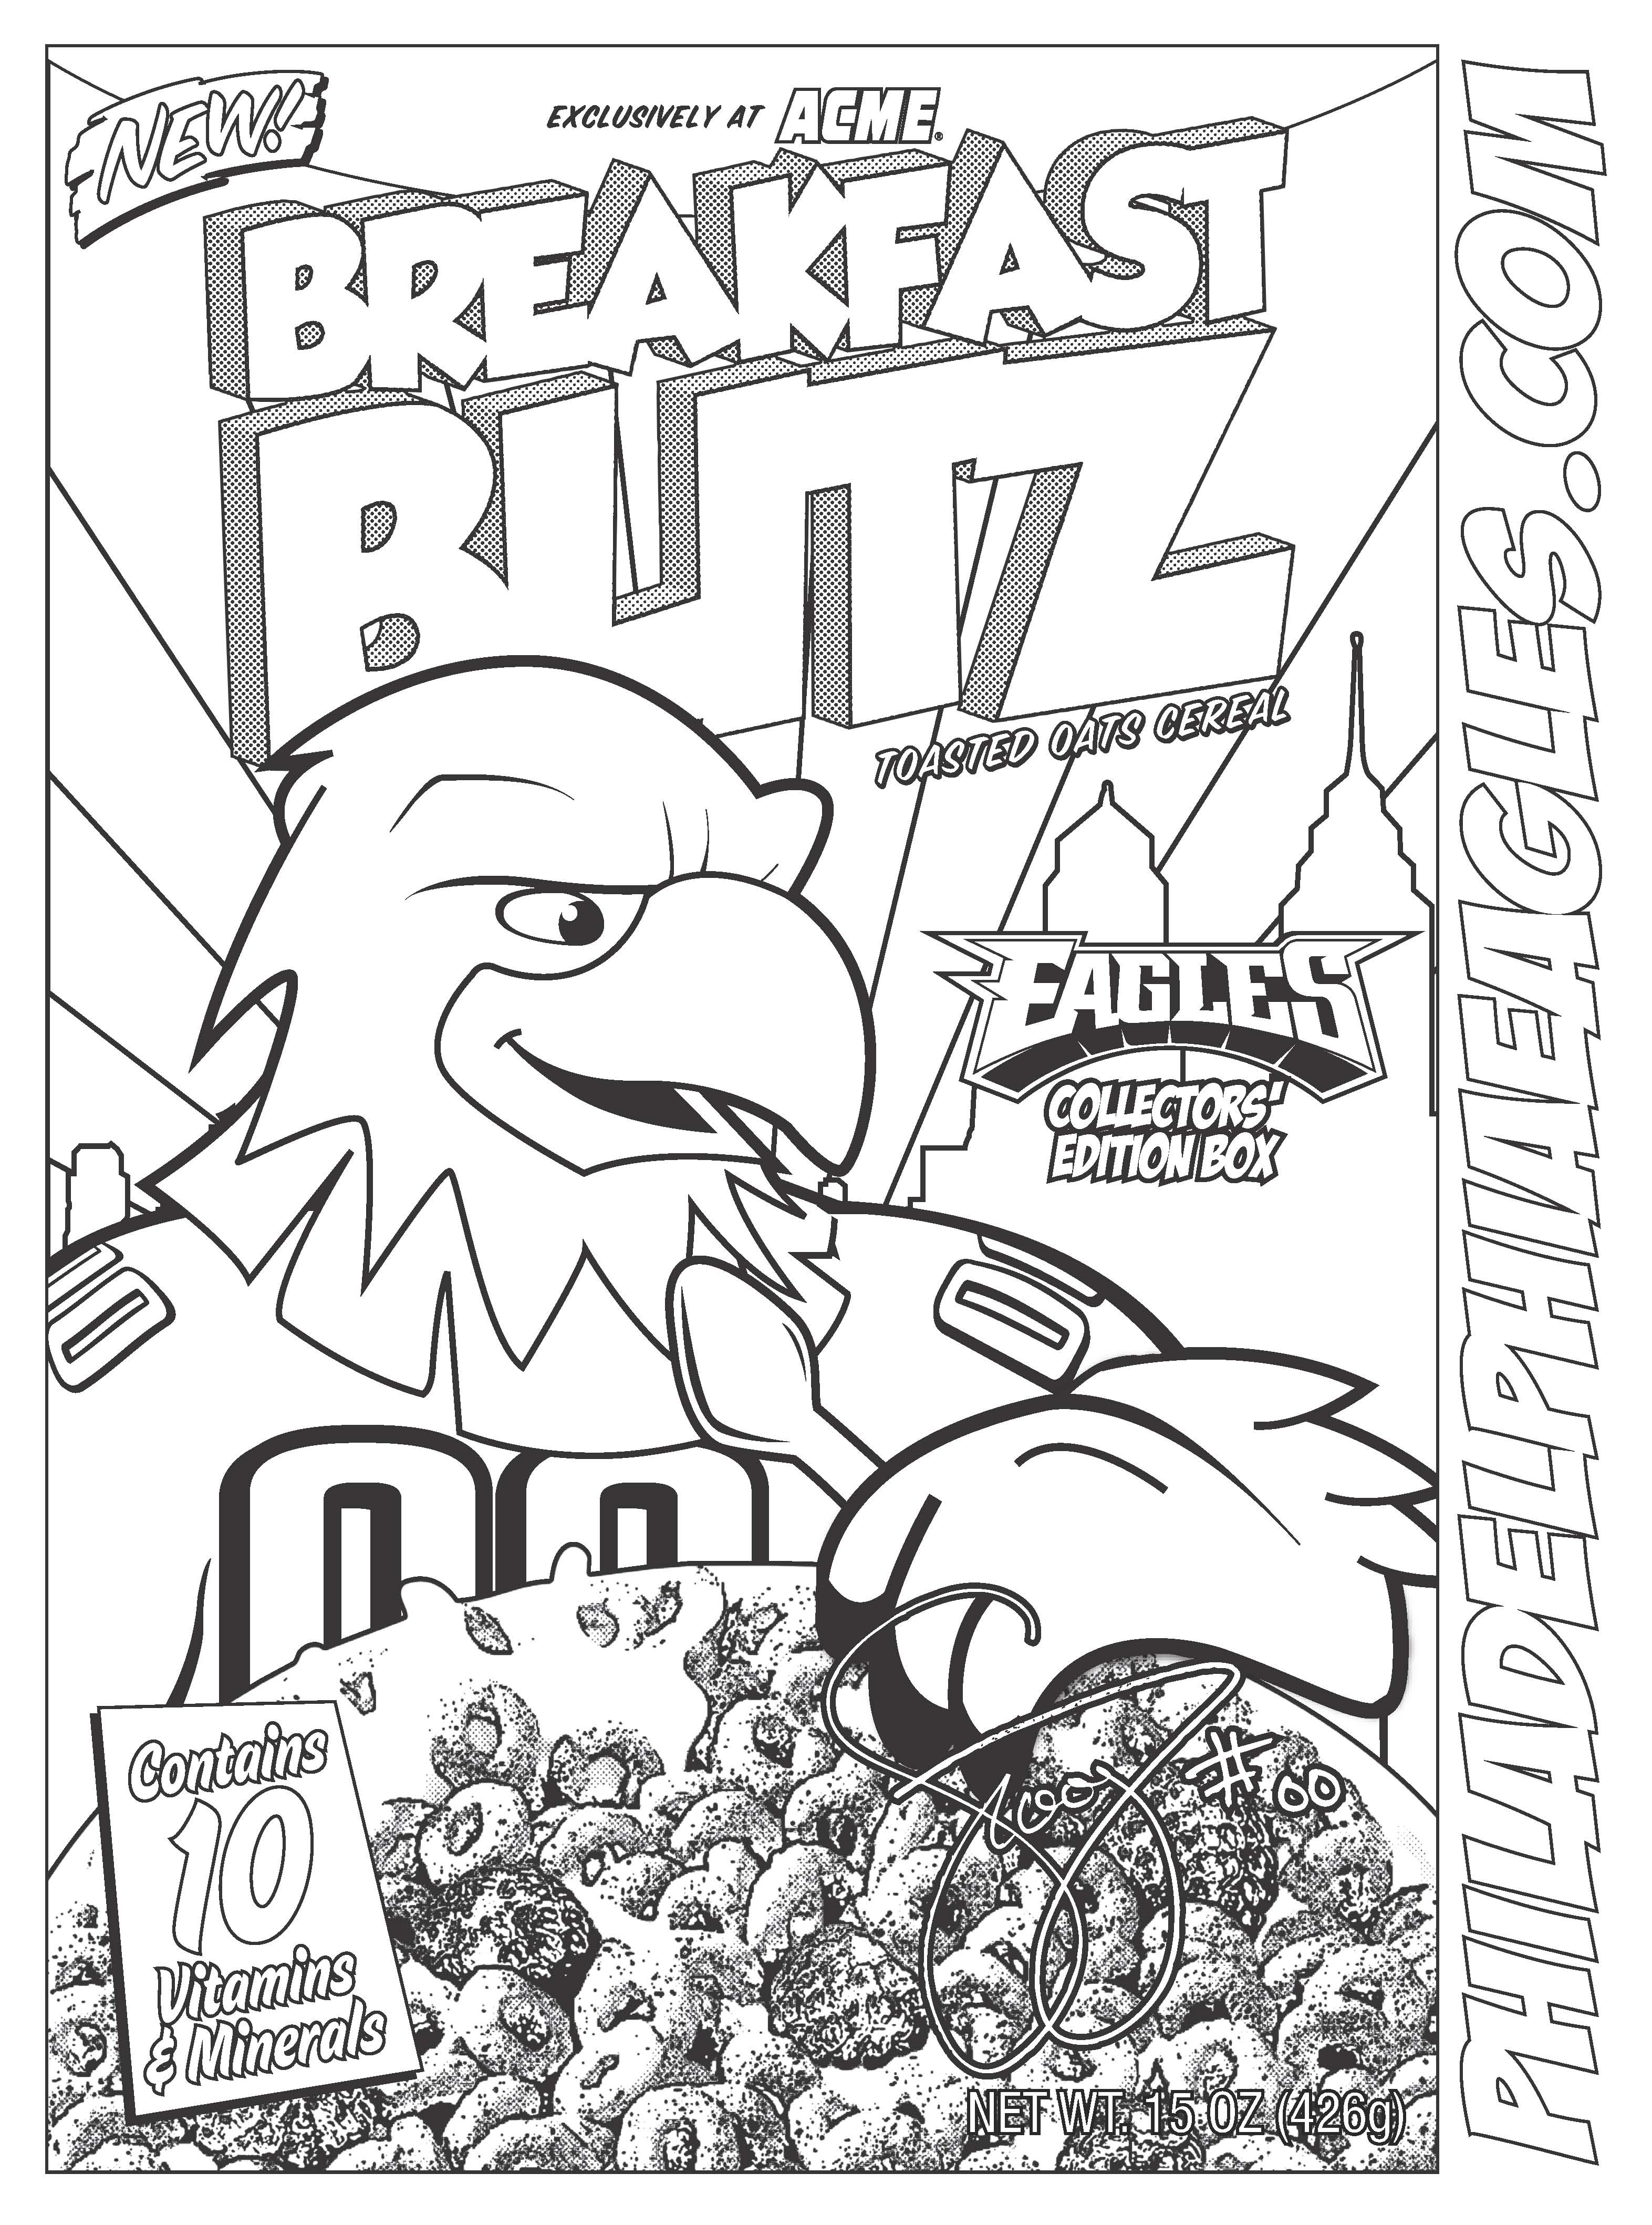 12 Pics of Seahawks Coloring Pages Preschool - Seattle Seahawks ...